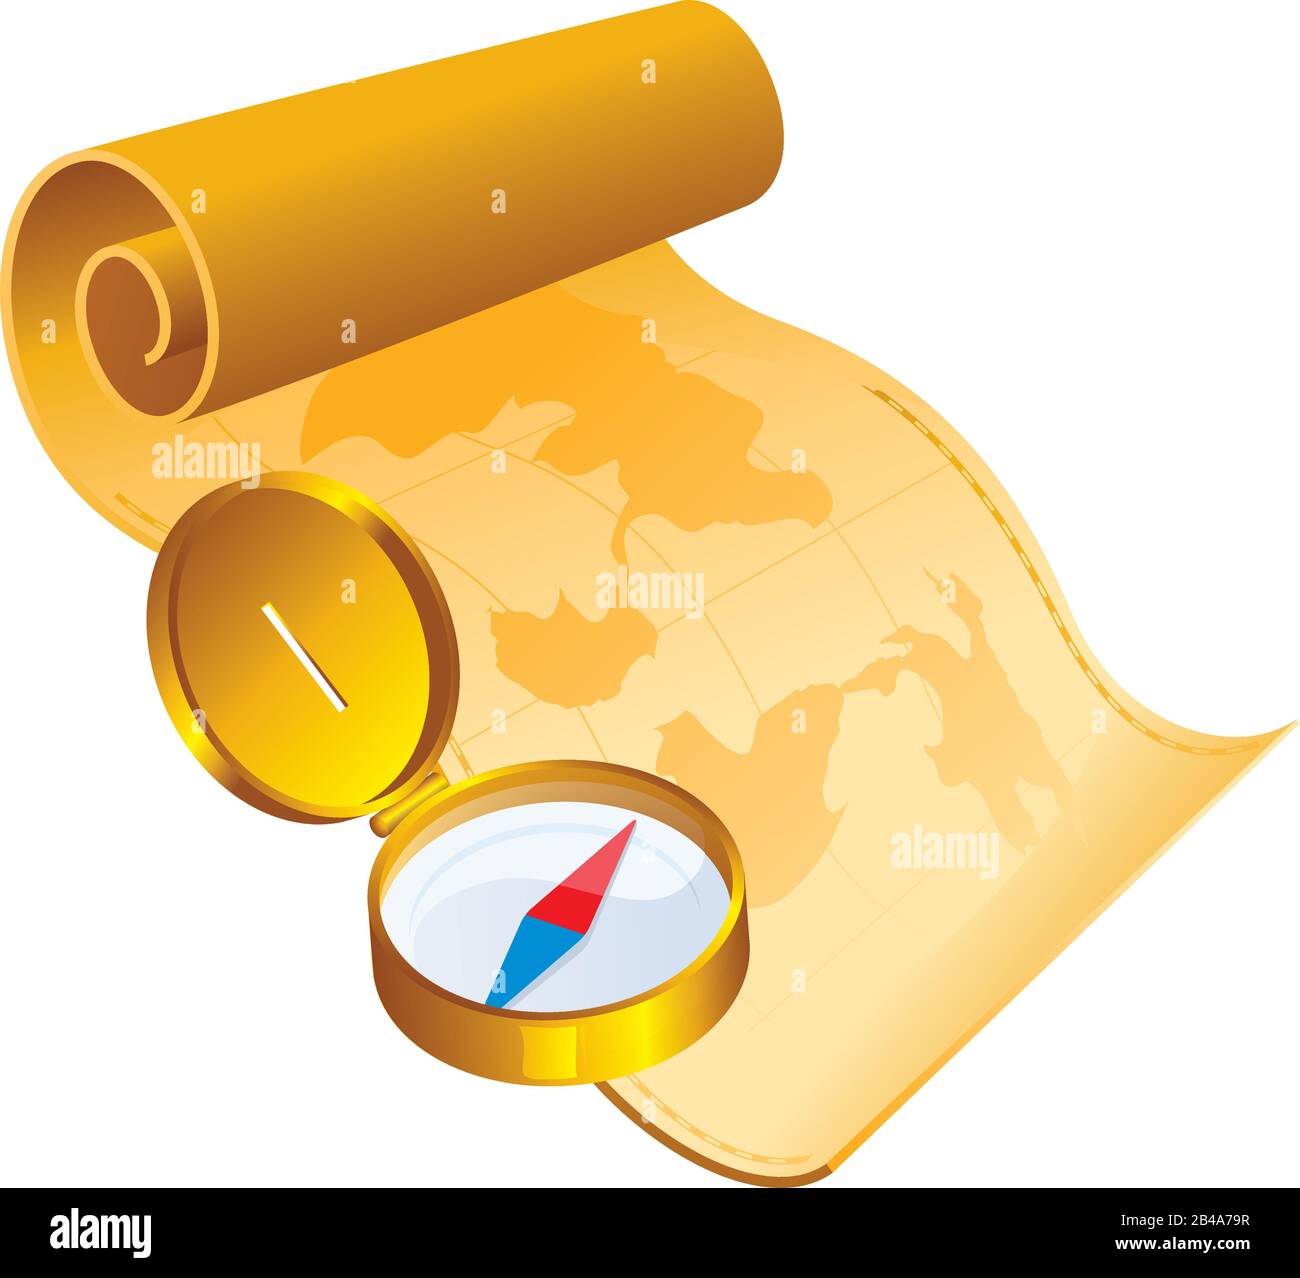 Illustration of map with compass, with nice background vector Stock Vector